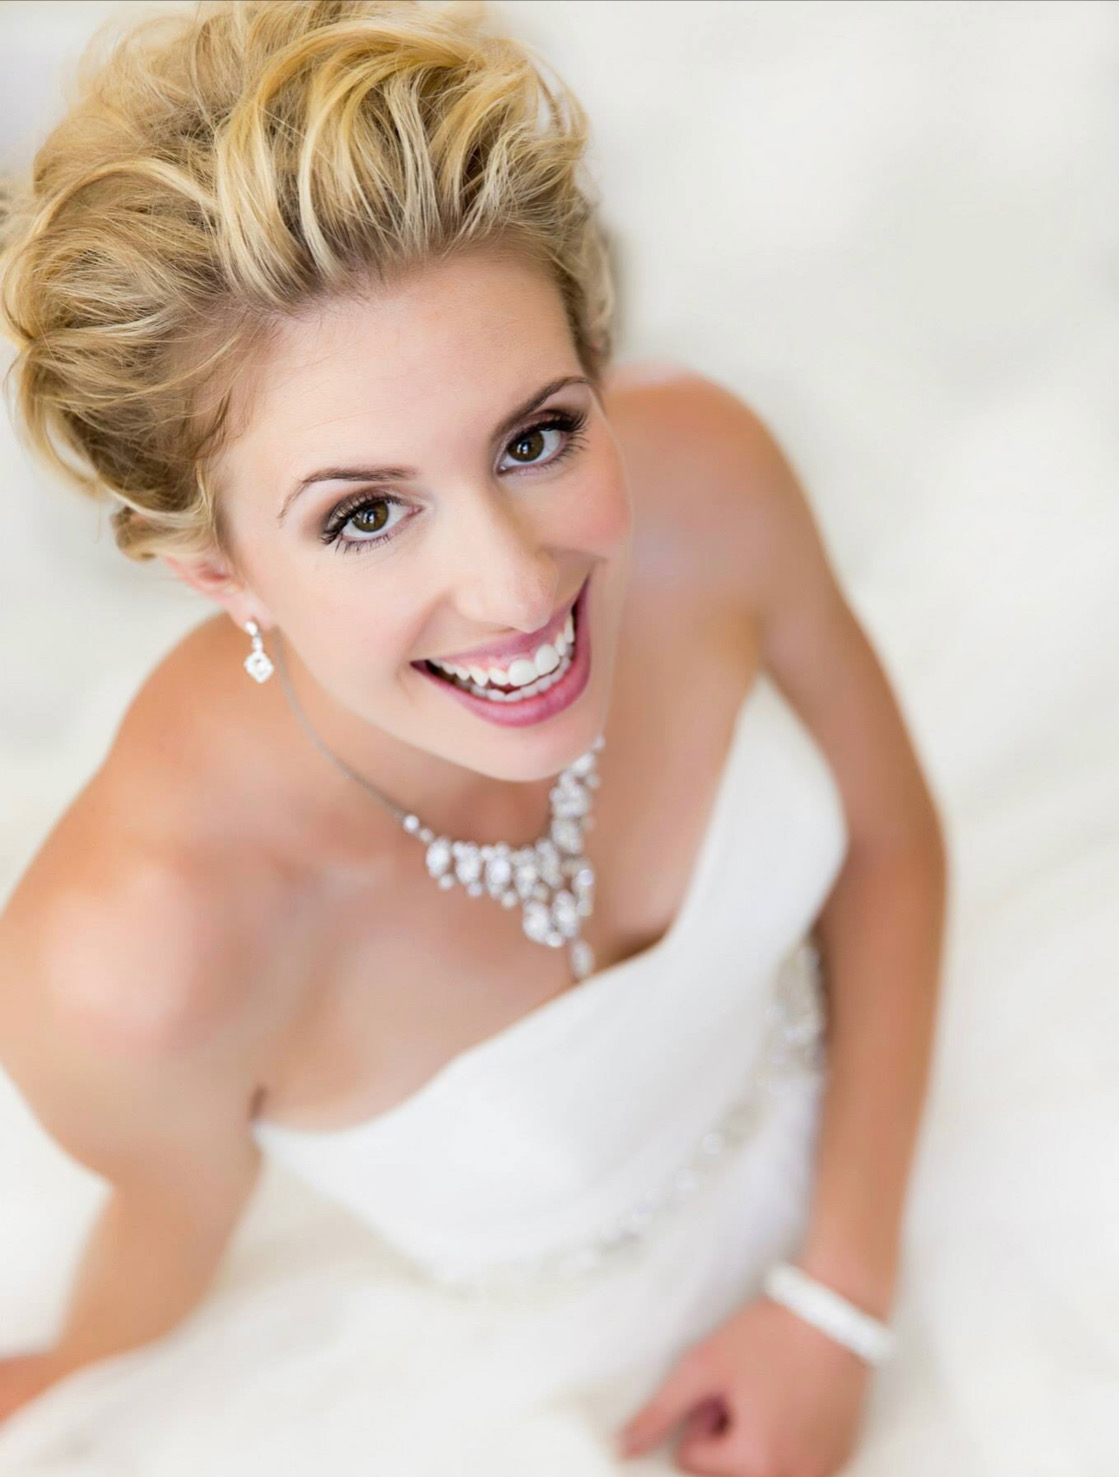 Bridal hair and makeup by Sunbear artists